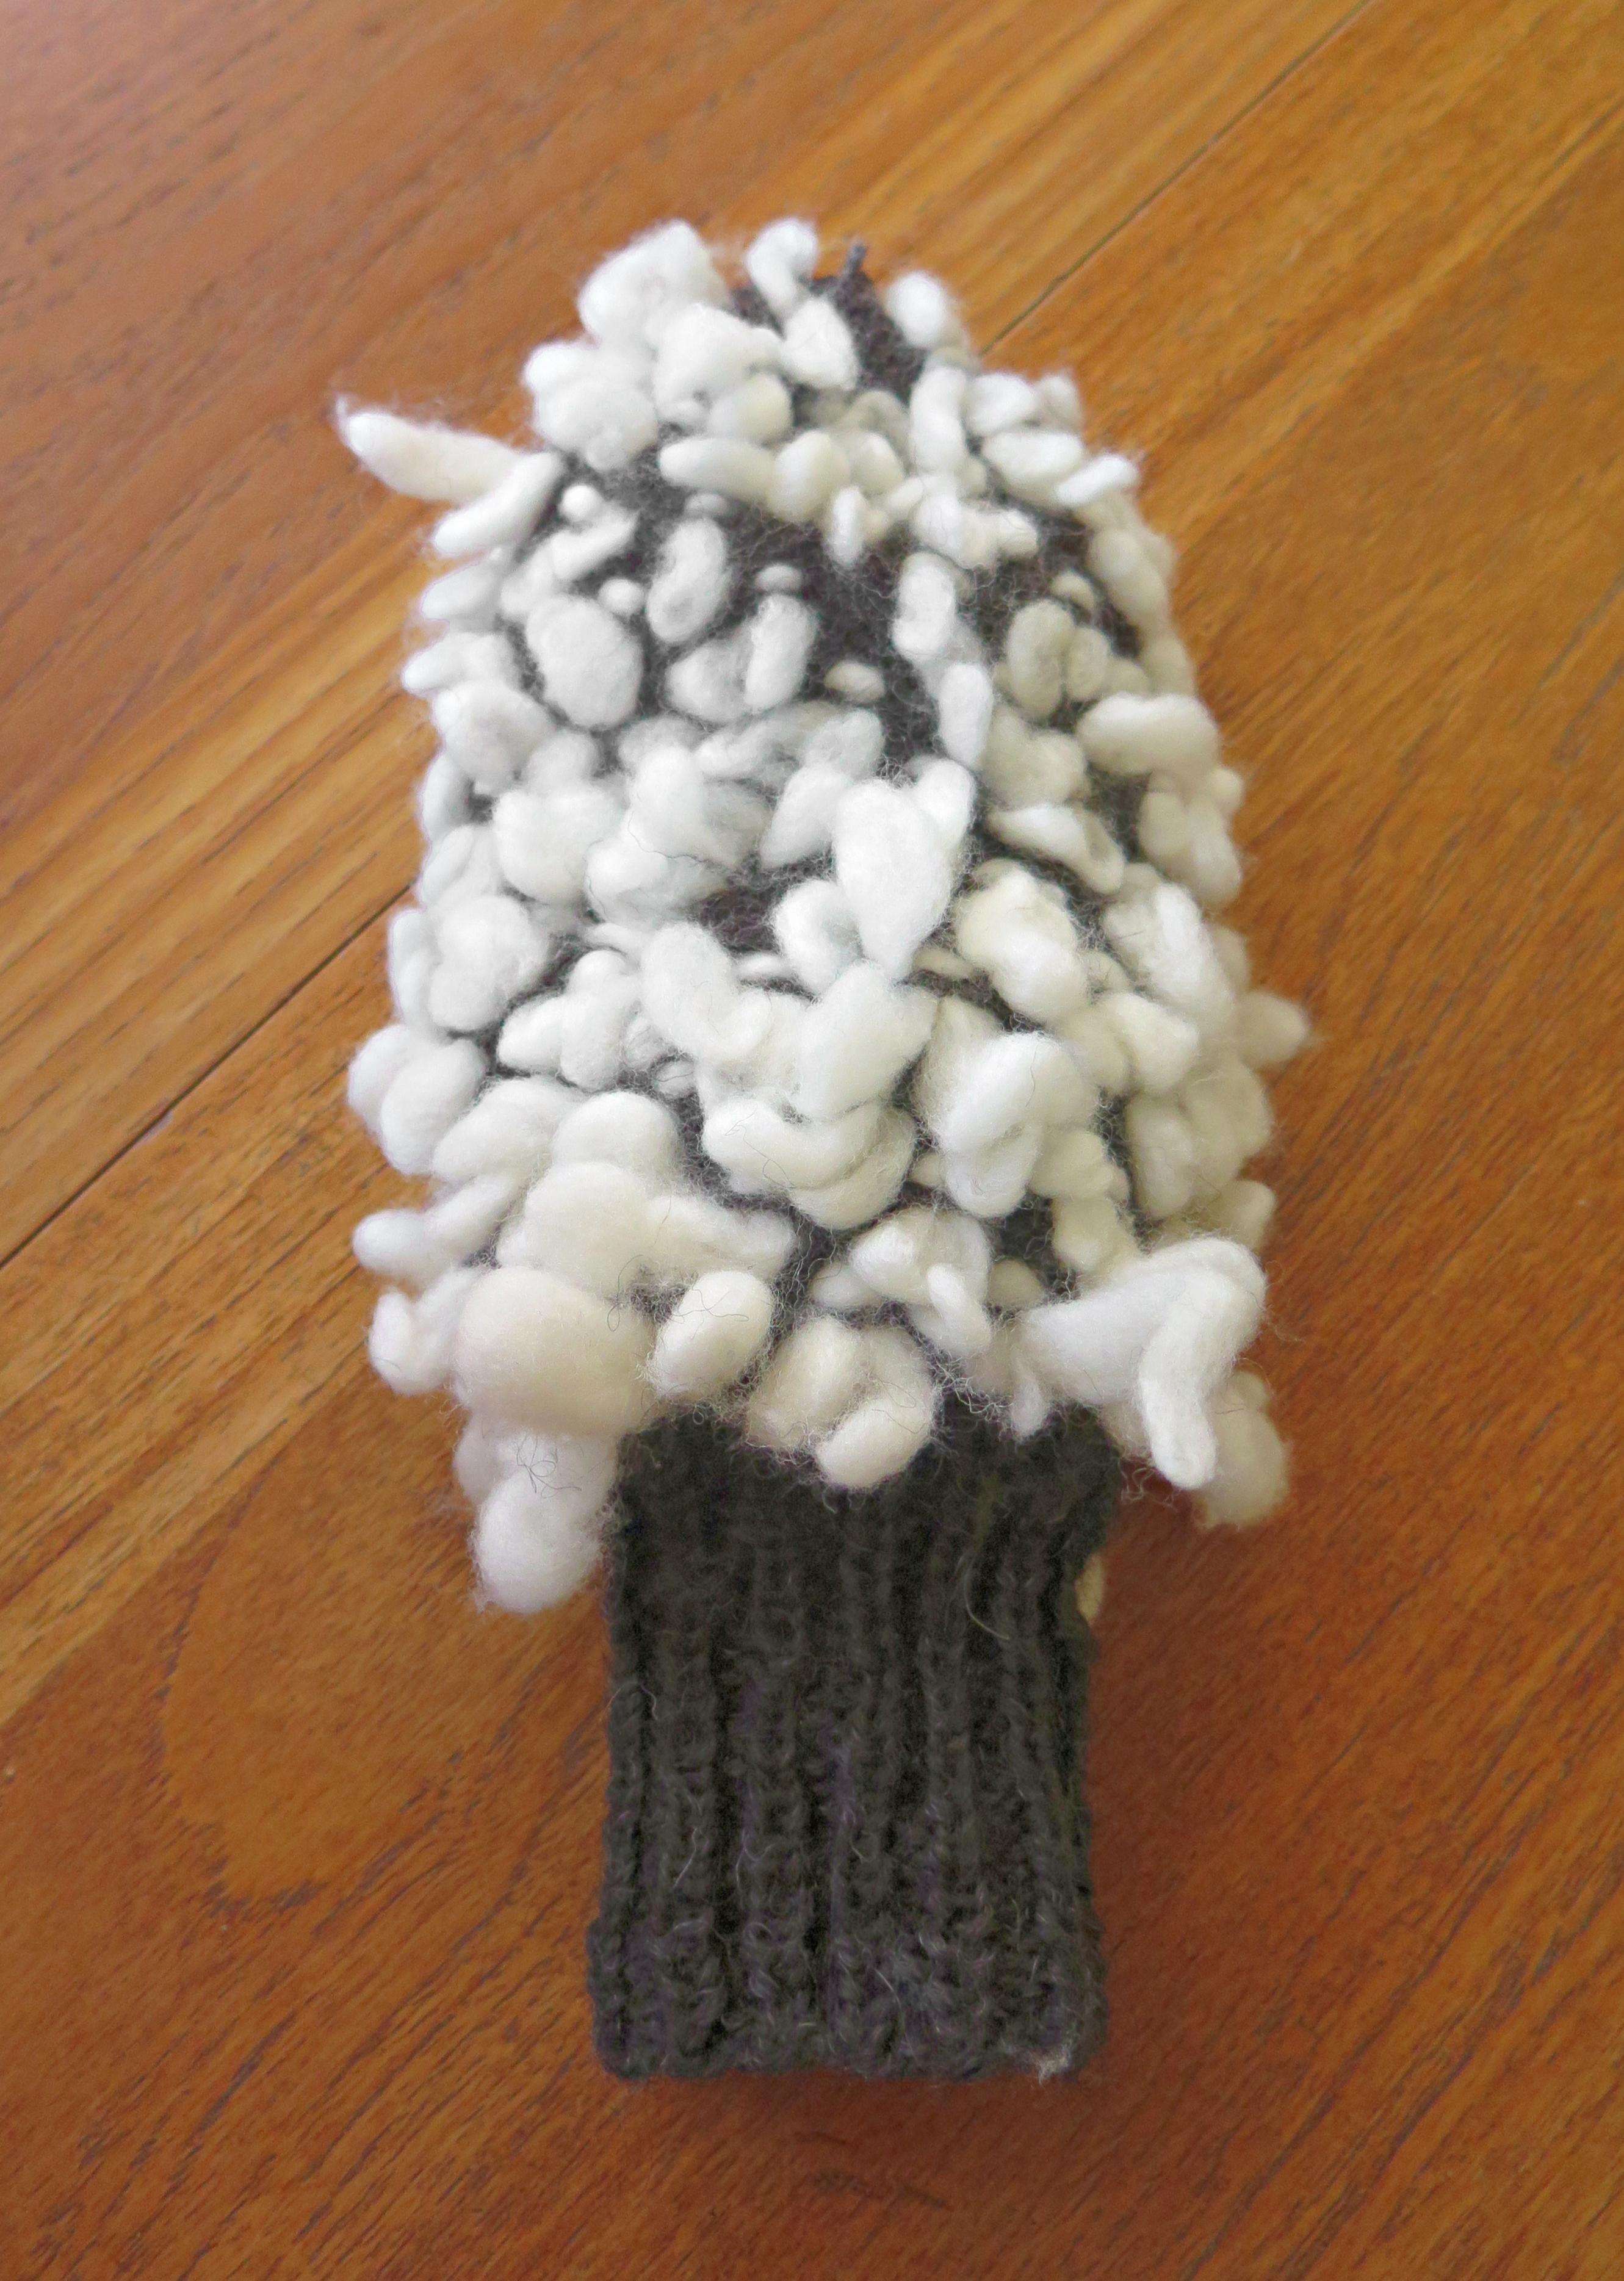 Inside of thrummed mitten showing the roving.